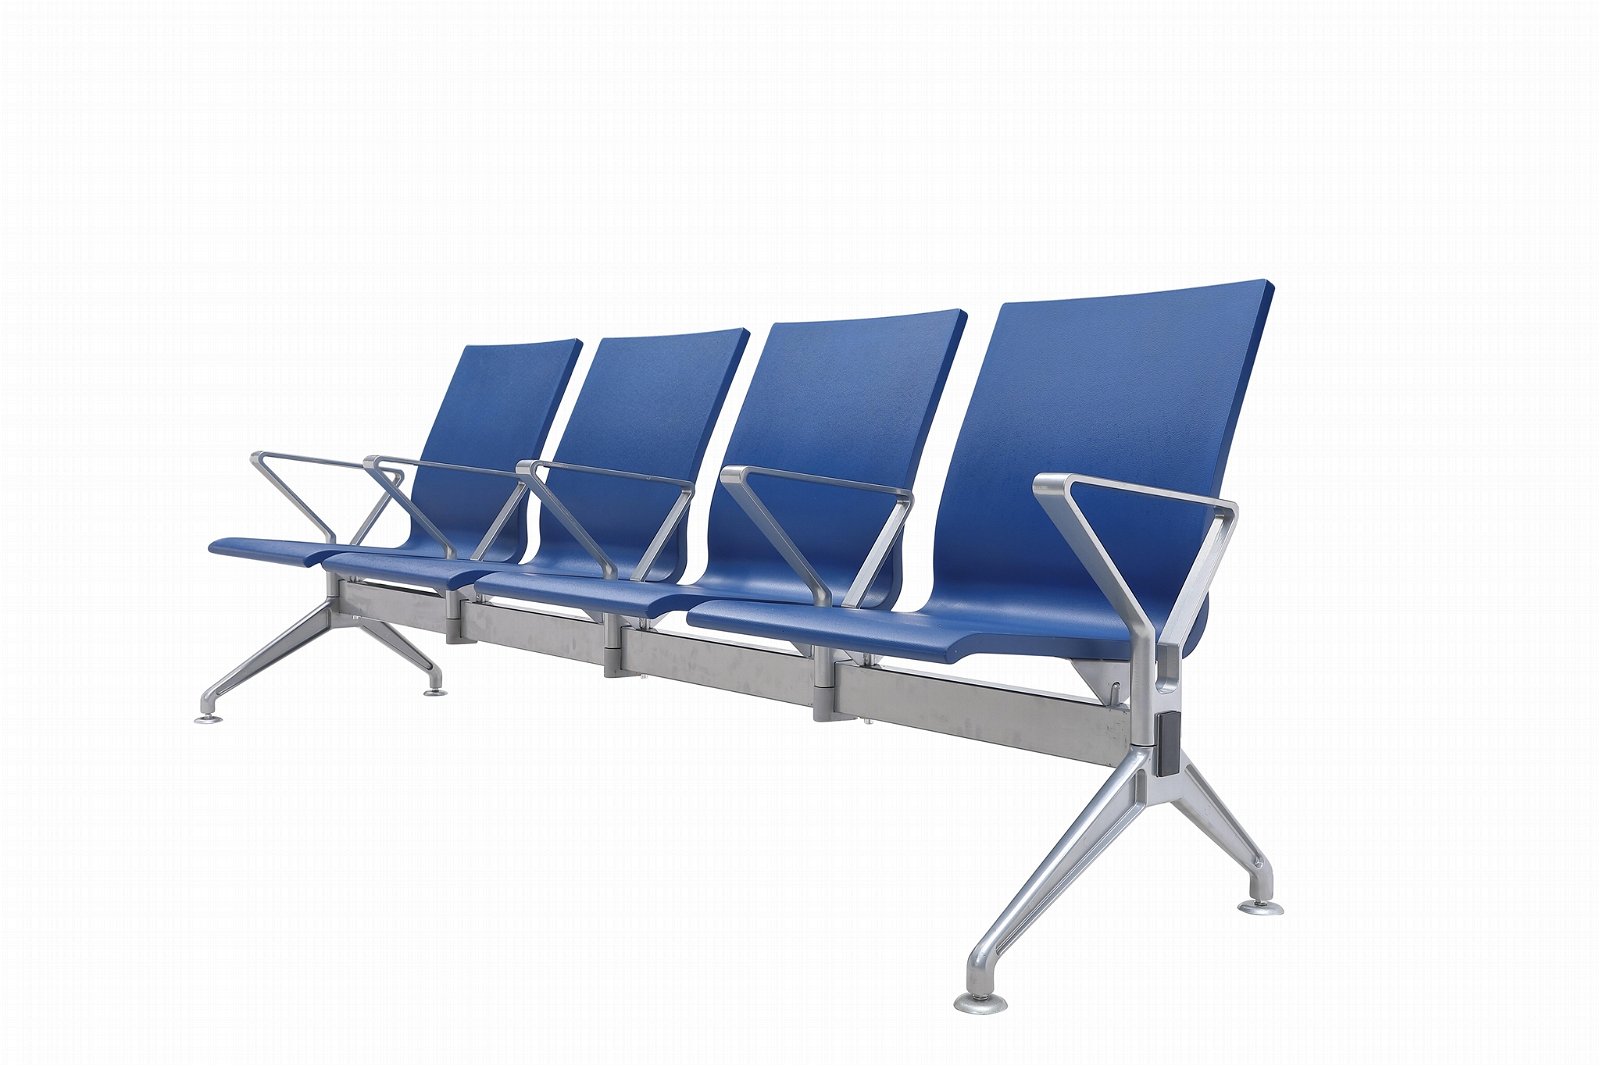 public seating used for hospital waiting area airport terminal 2